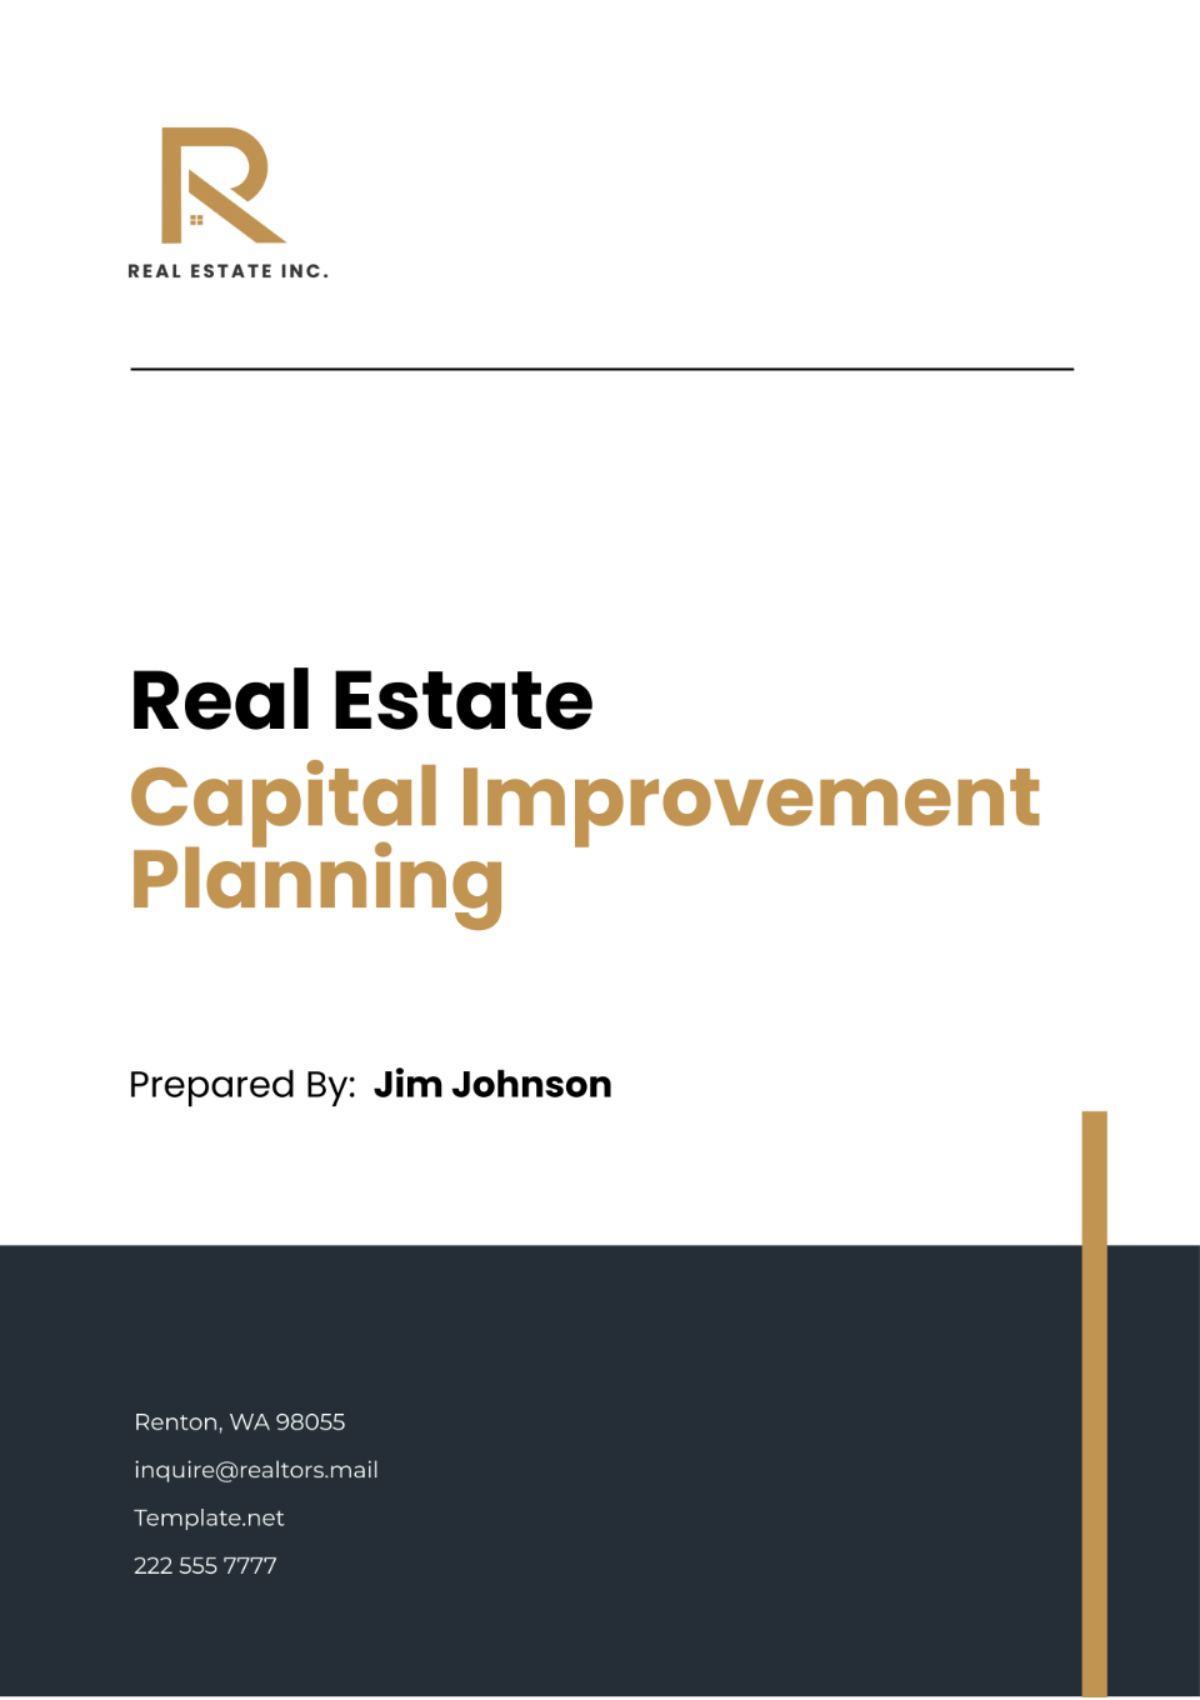 Real Estate Capital Improvement Planning Template